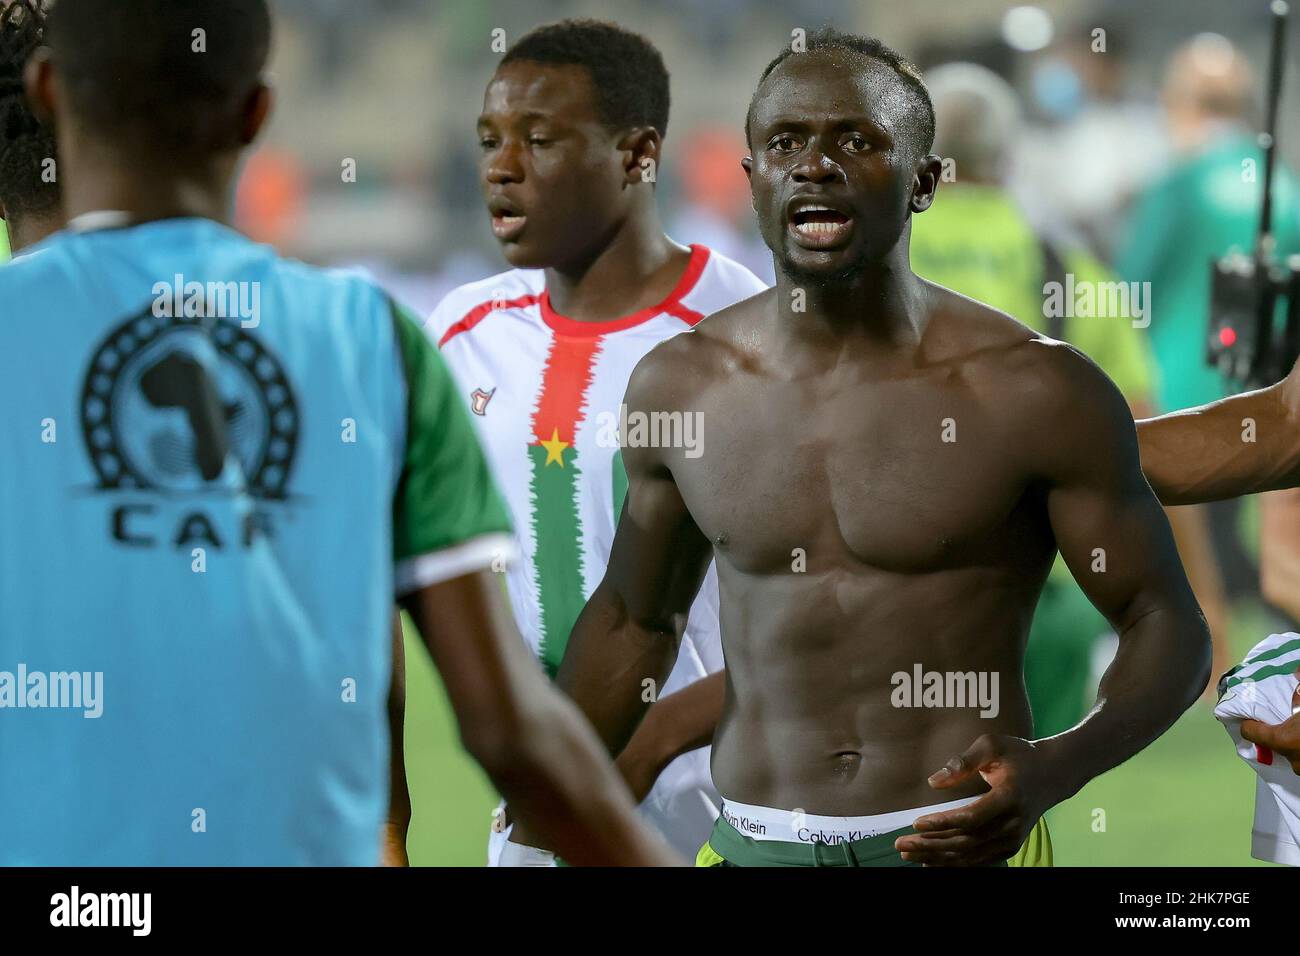 CAMEROON, Yaounde, 02 February 2022 - Sadio Mane of Senegal during the Africa Cup of Nations play offs semi final match between Burkina Faso and Senegal at Stade Ahmadou Ahidjo,Yaounde, Cameroon, 02/02/2022/ Photo by SF Stock Photo